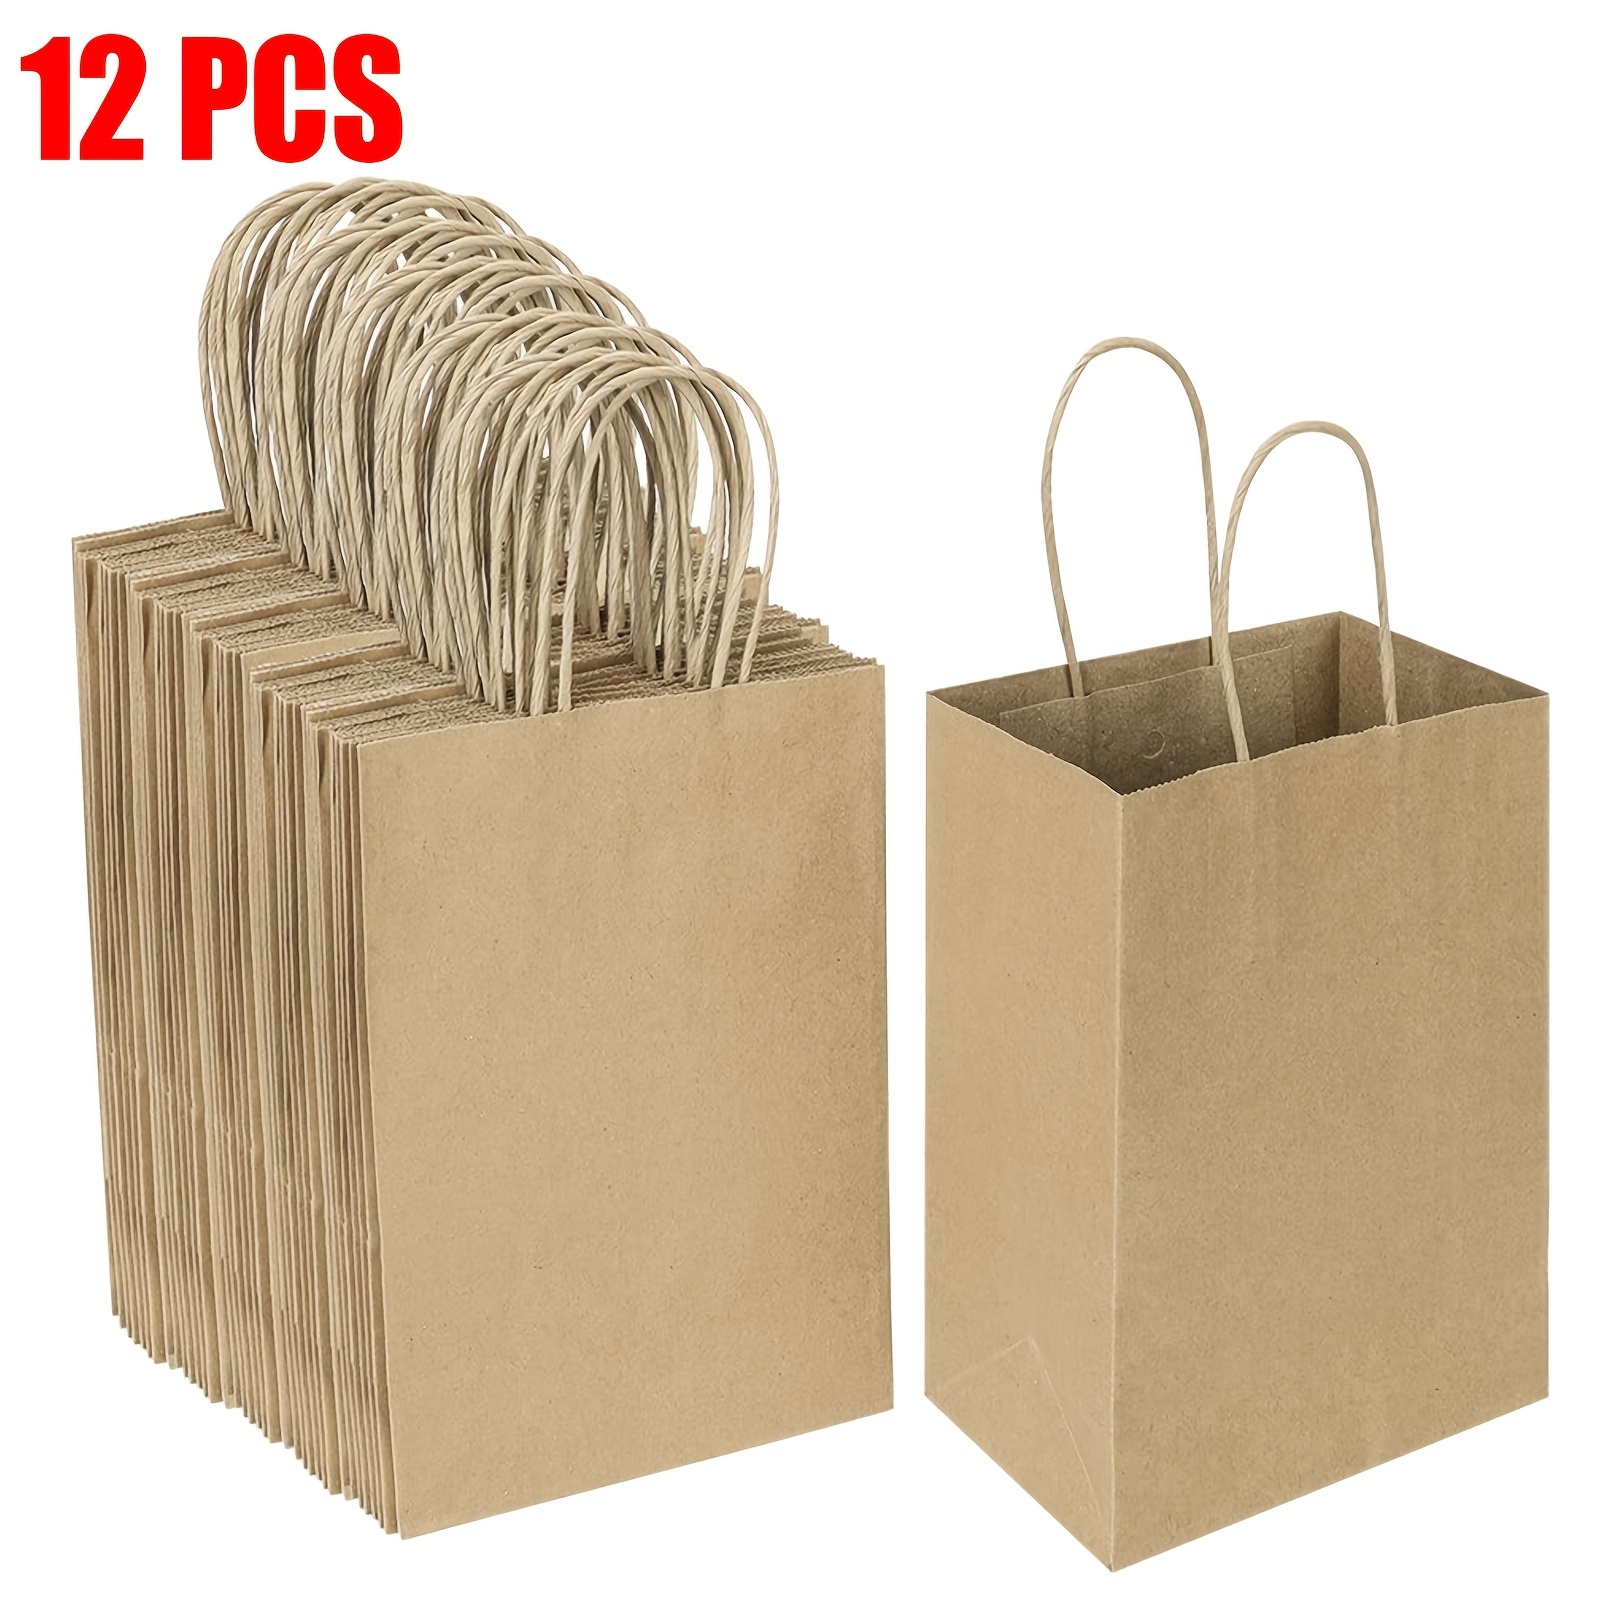 24 Pieces Kraft Paper Party Favor Bags with Handle Assorted Colors (Rainbow)